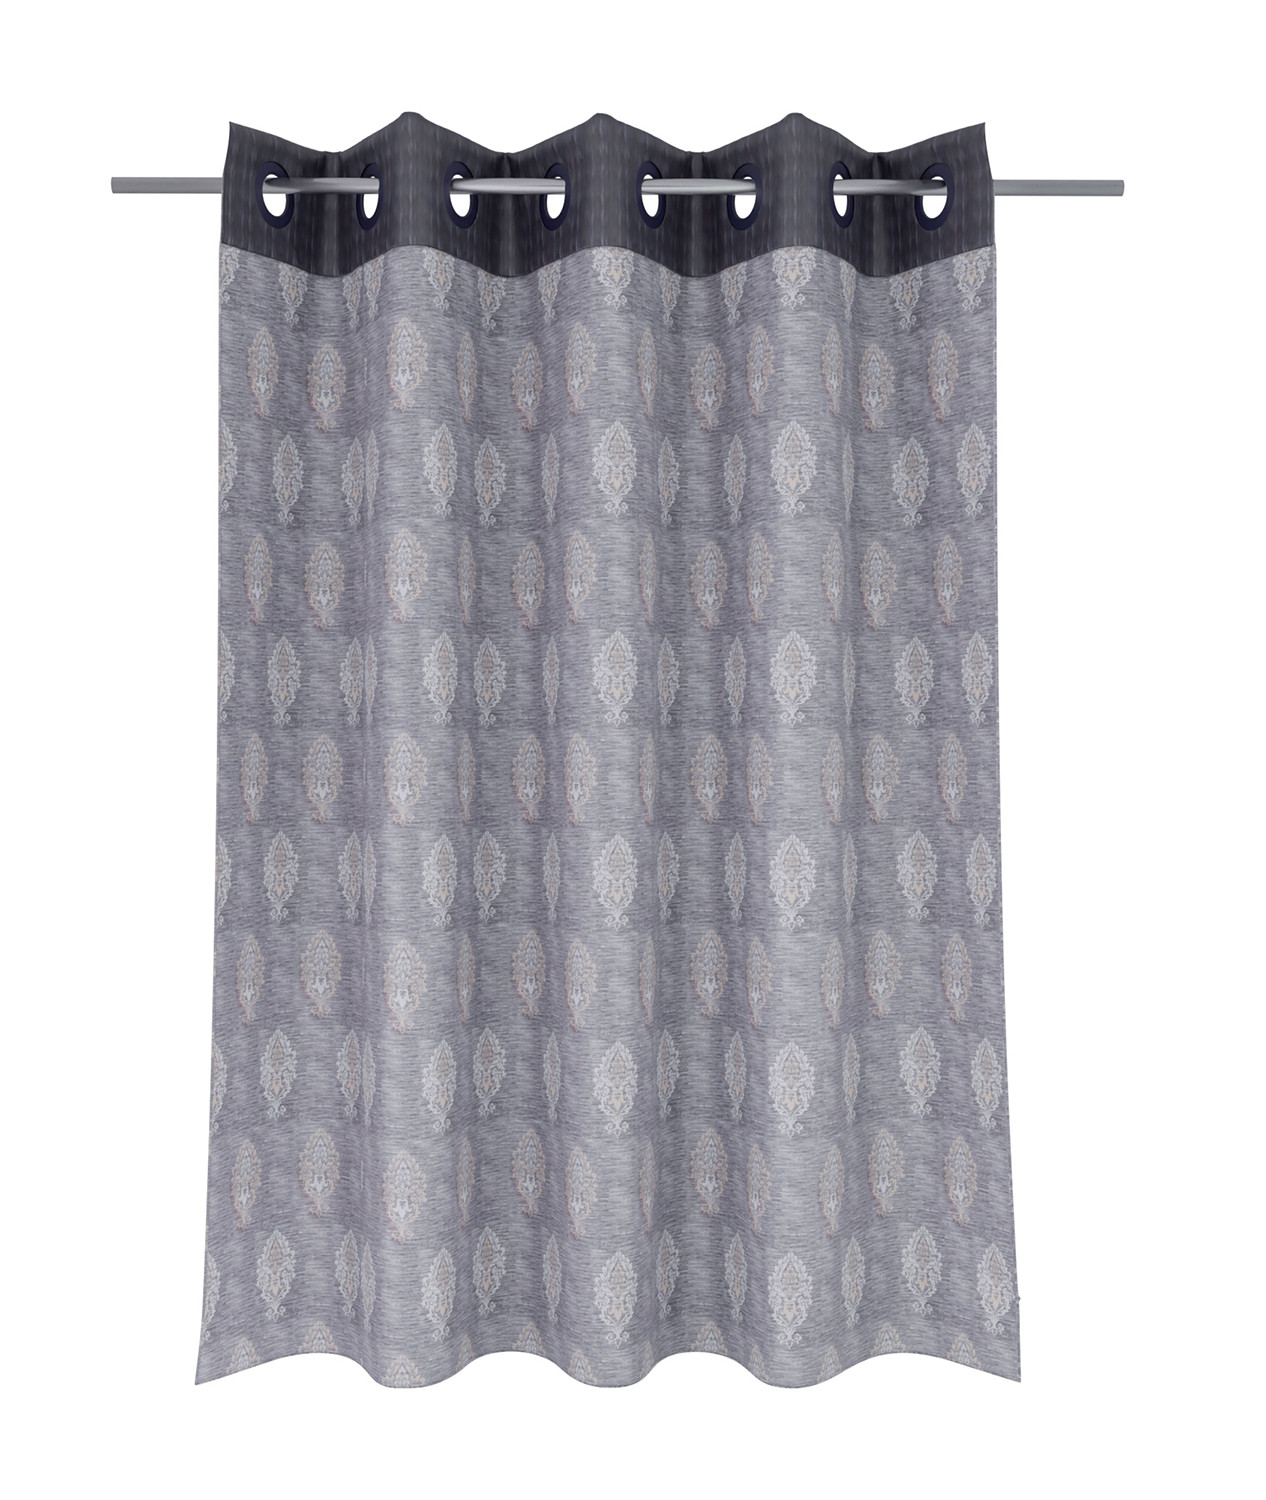 Kuber Industries Faux Silk Decorative 5 Feet Window Curtain | Damask Print Darkening Blackout | Drapes Curtain With 8 Eyelet For Home & Office (Gray)